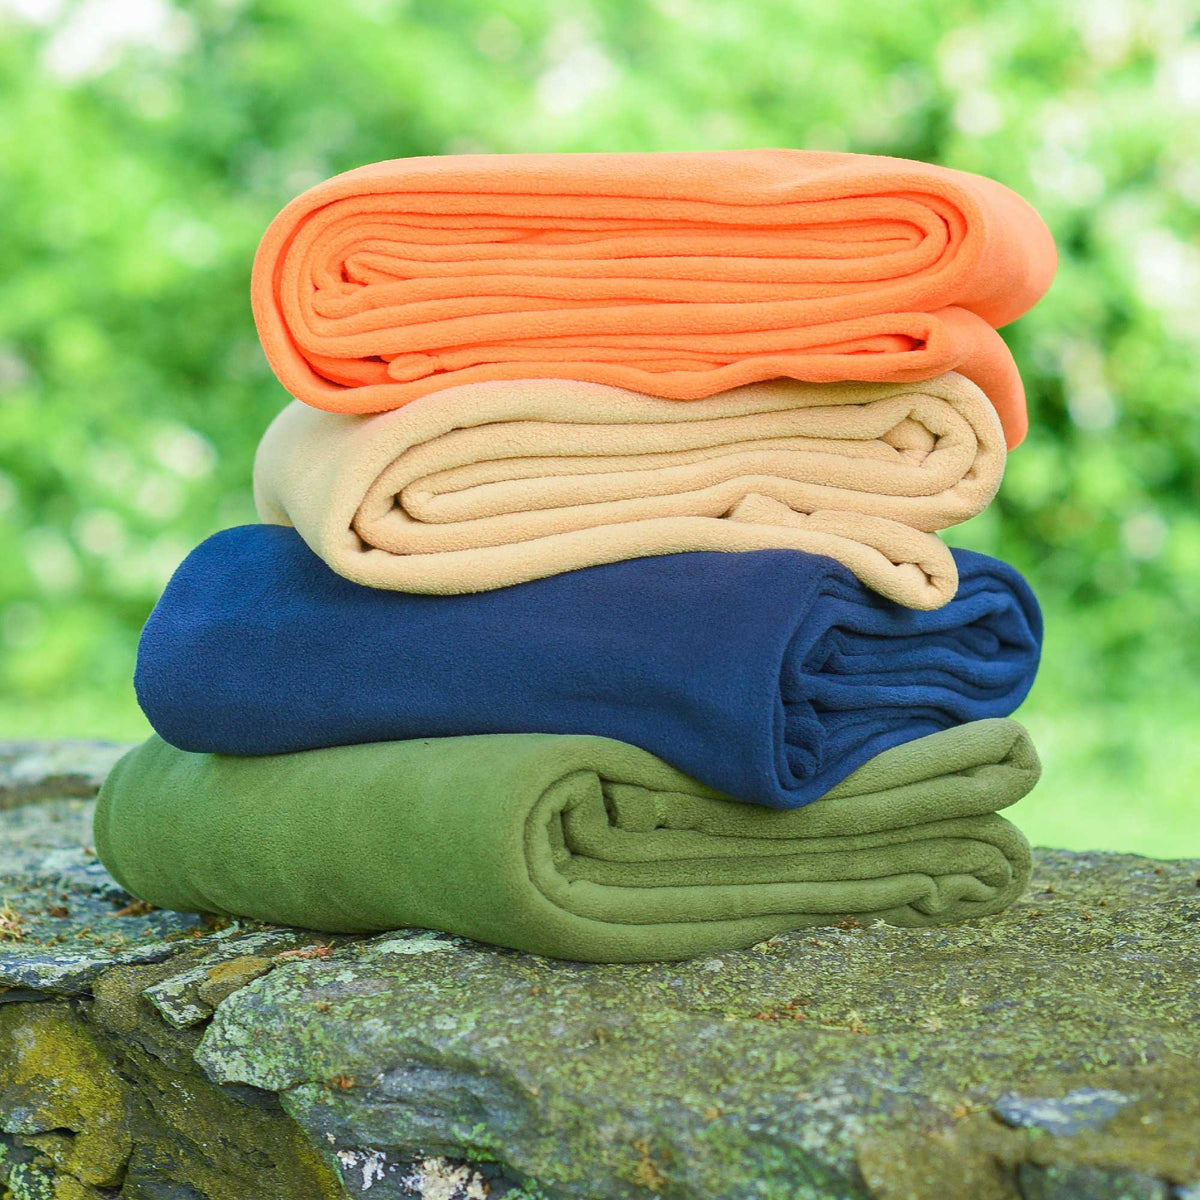 Peaceful Touch Fleece Blankets - (Discontinued Sizes &amp; Colors)